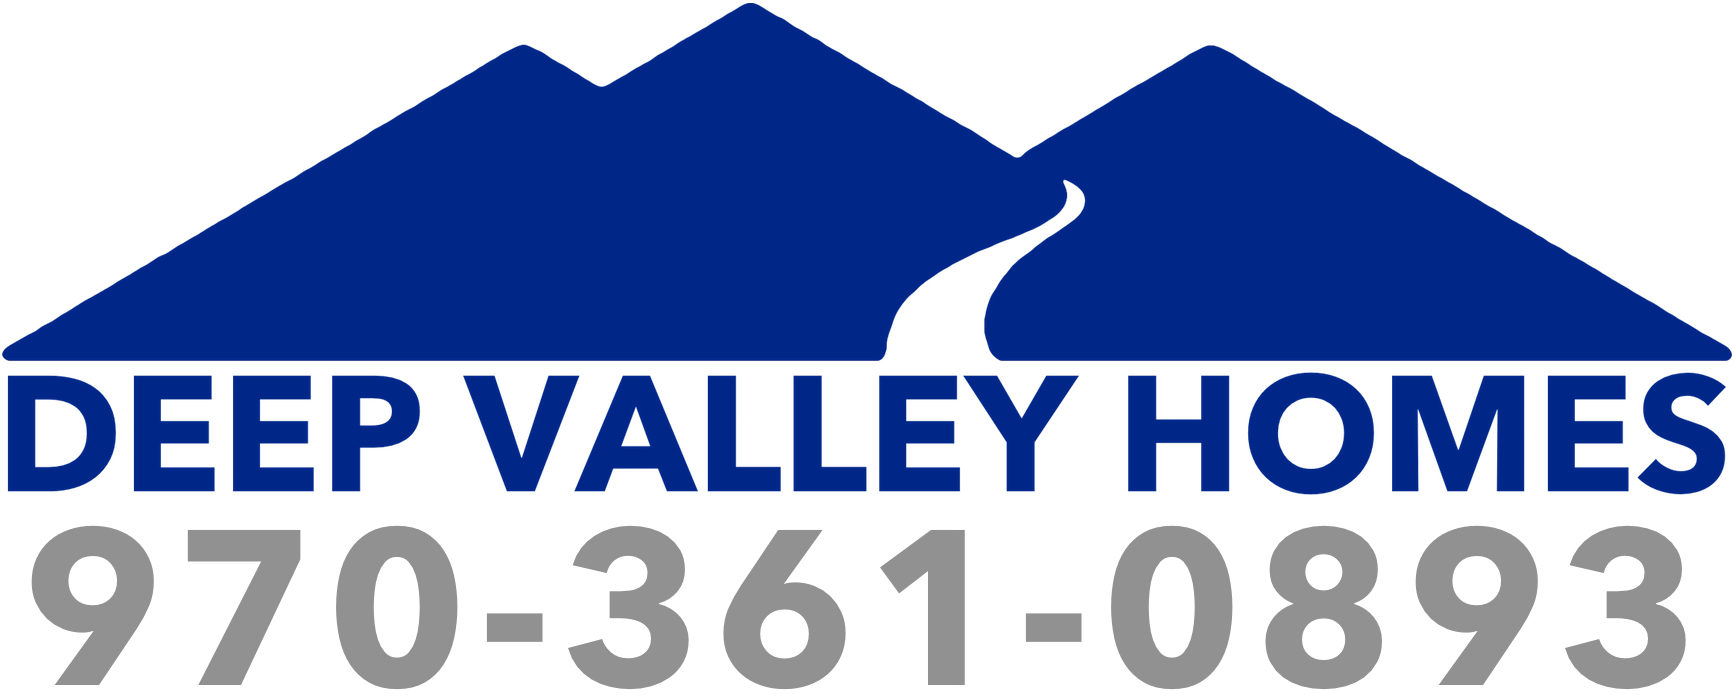 Deep Valley Homes